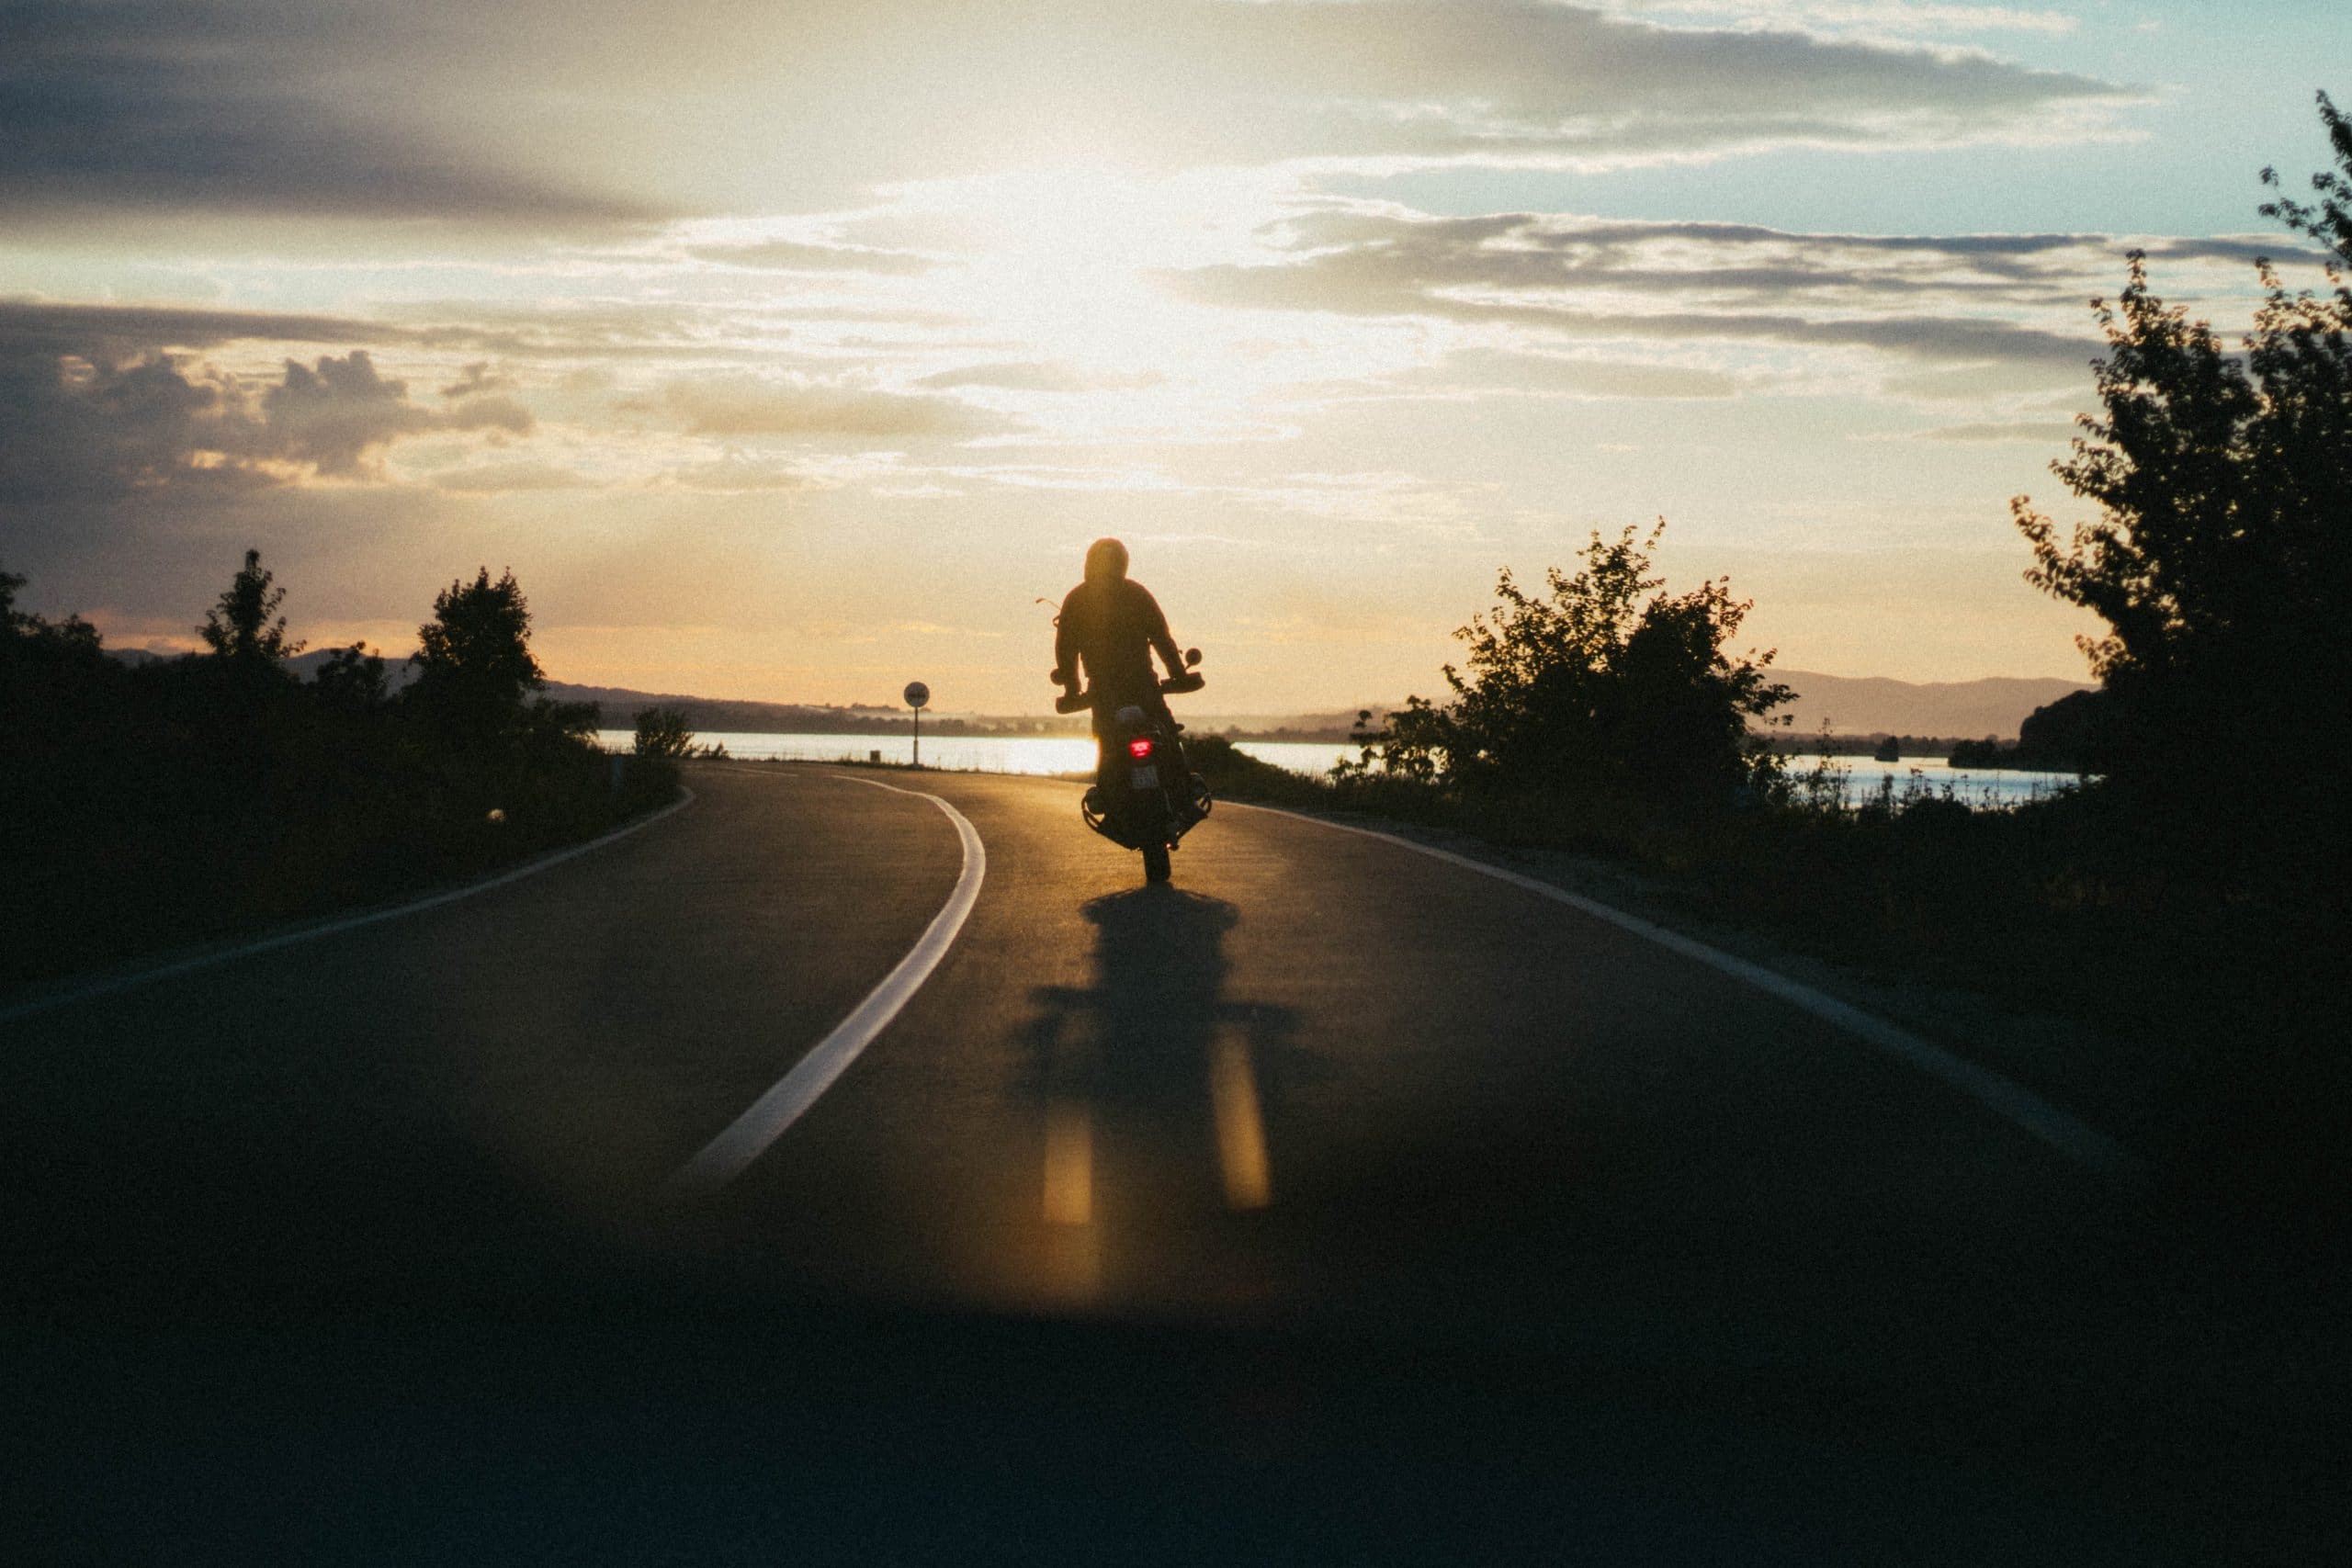 Could Not Wearing a Motorcycle Helmet Affect My Personal Injury Case?